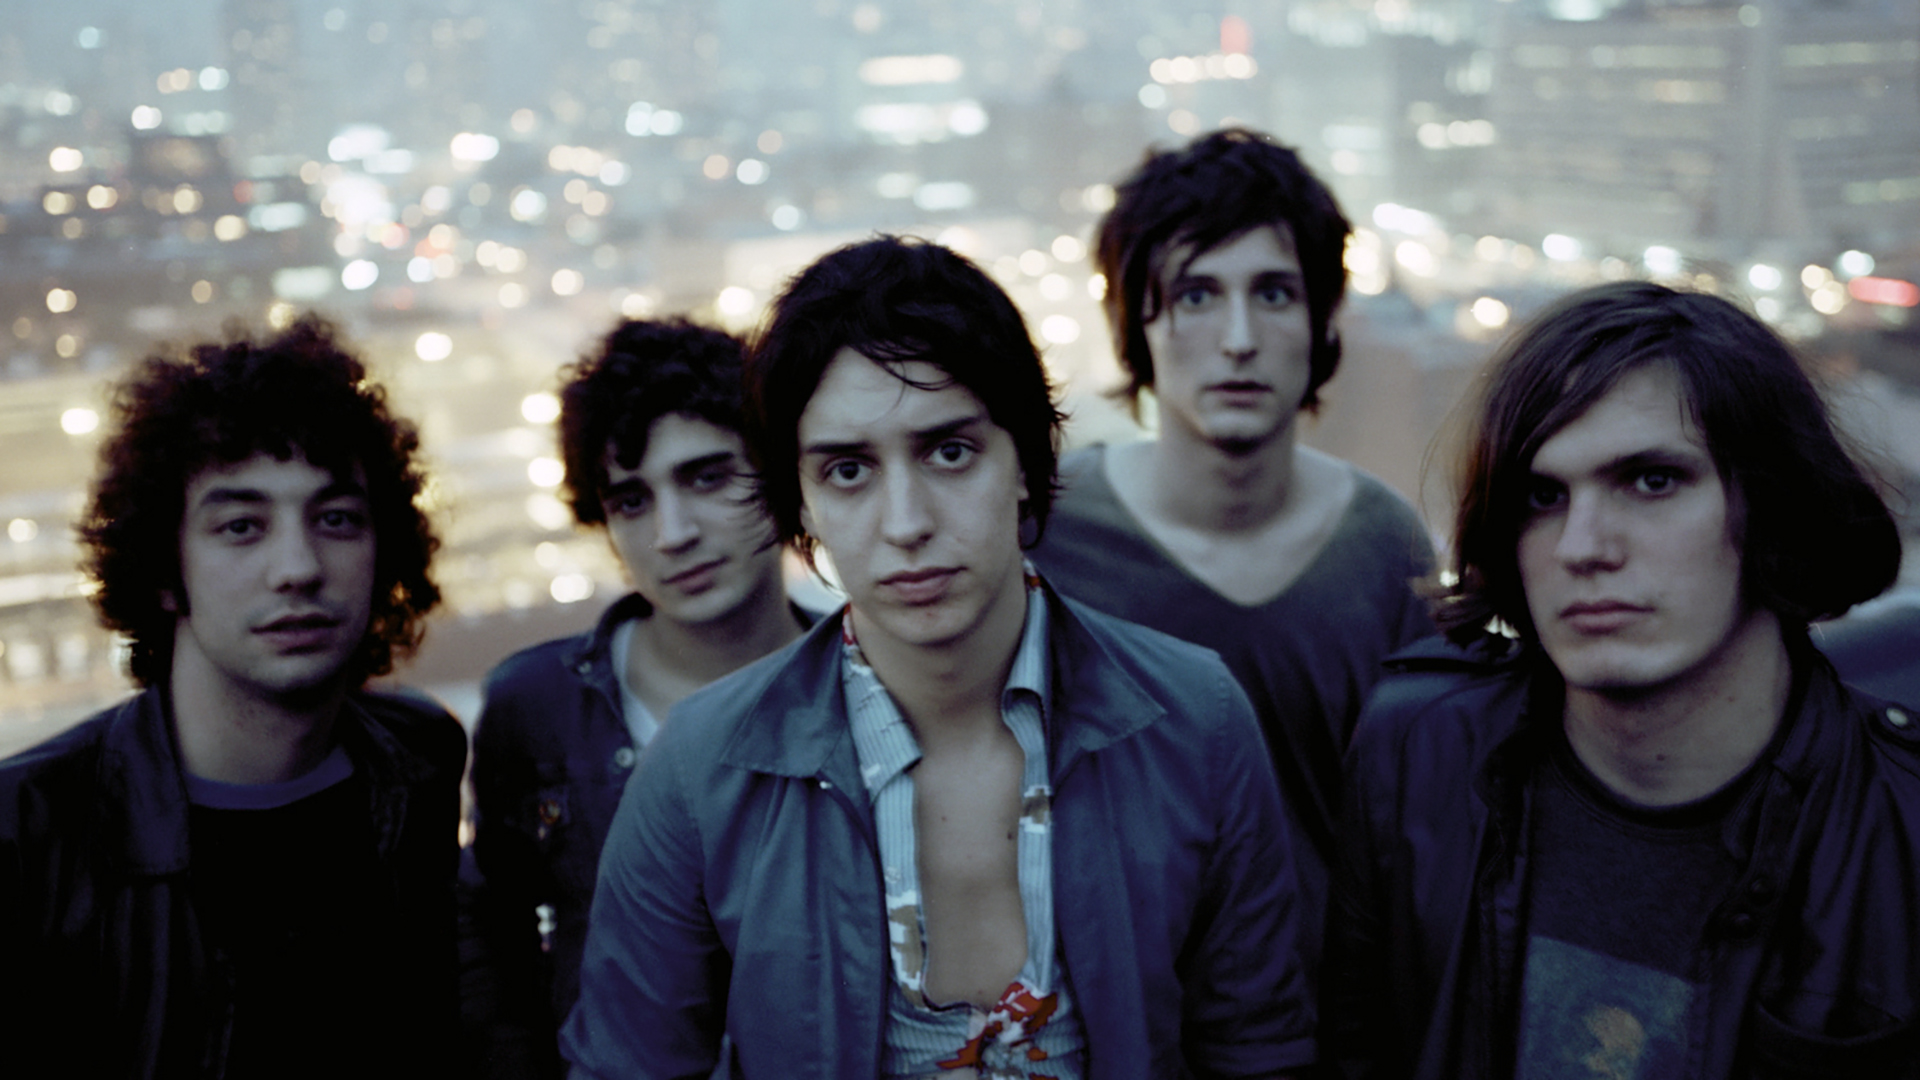 The Strokes band